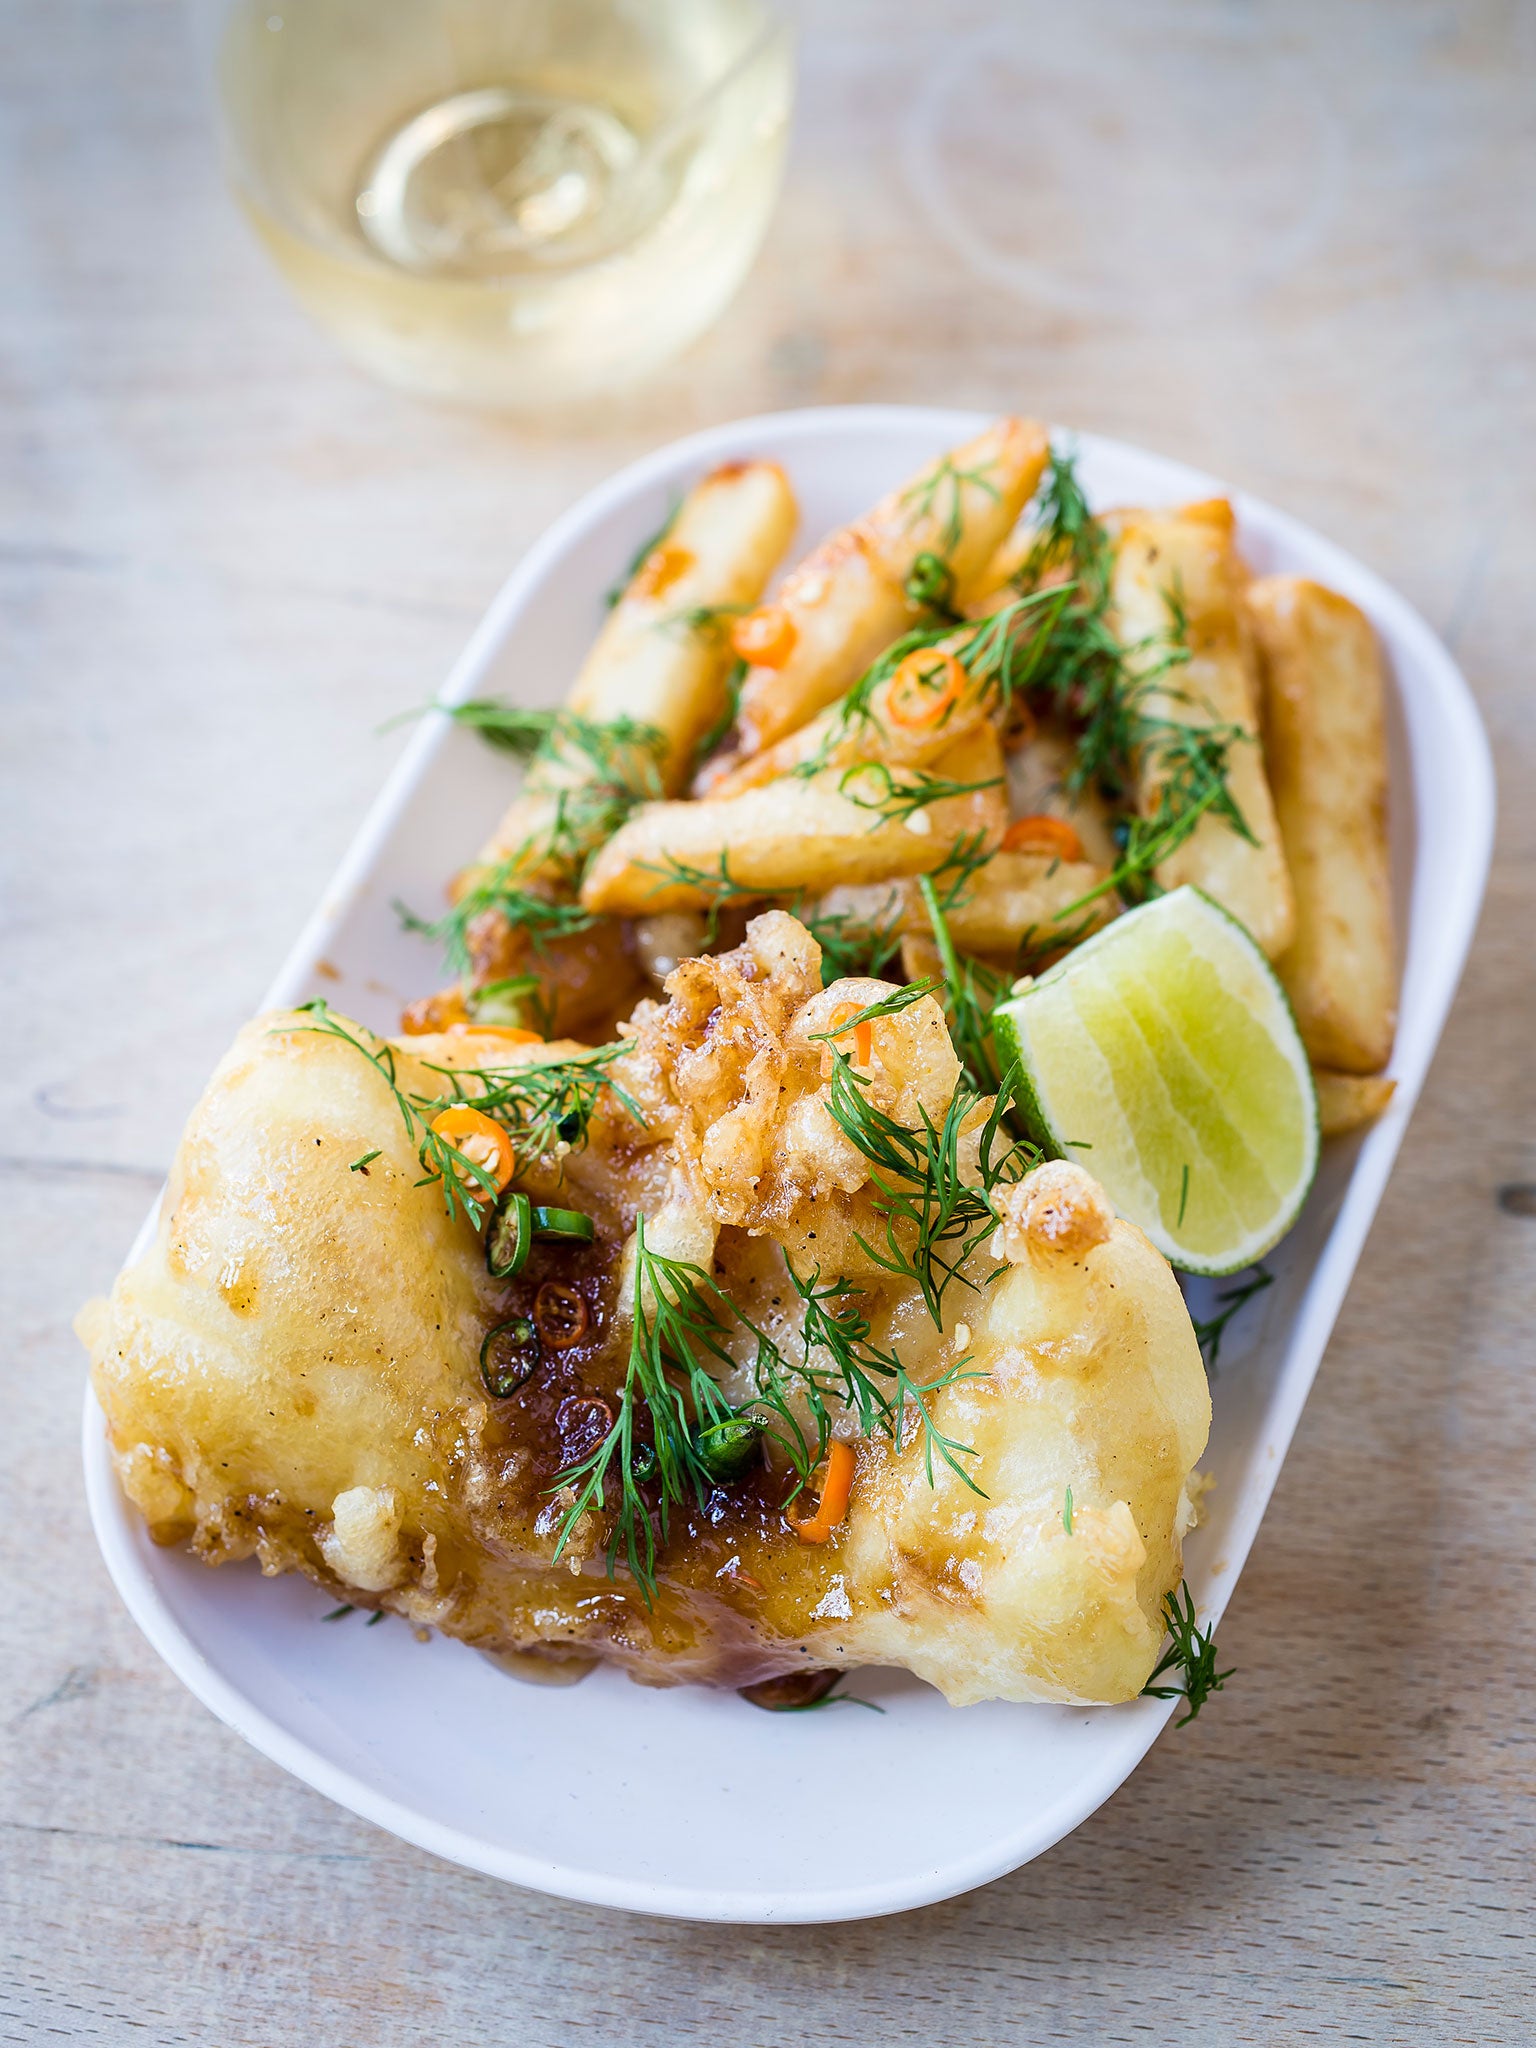 Delicious: Lemongrass fish and chips